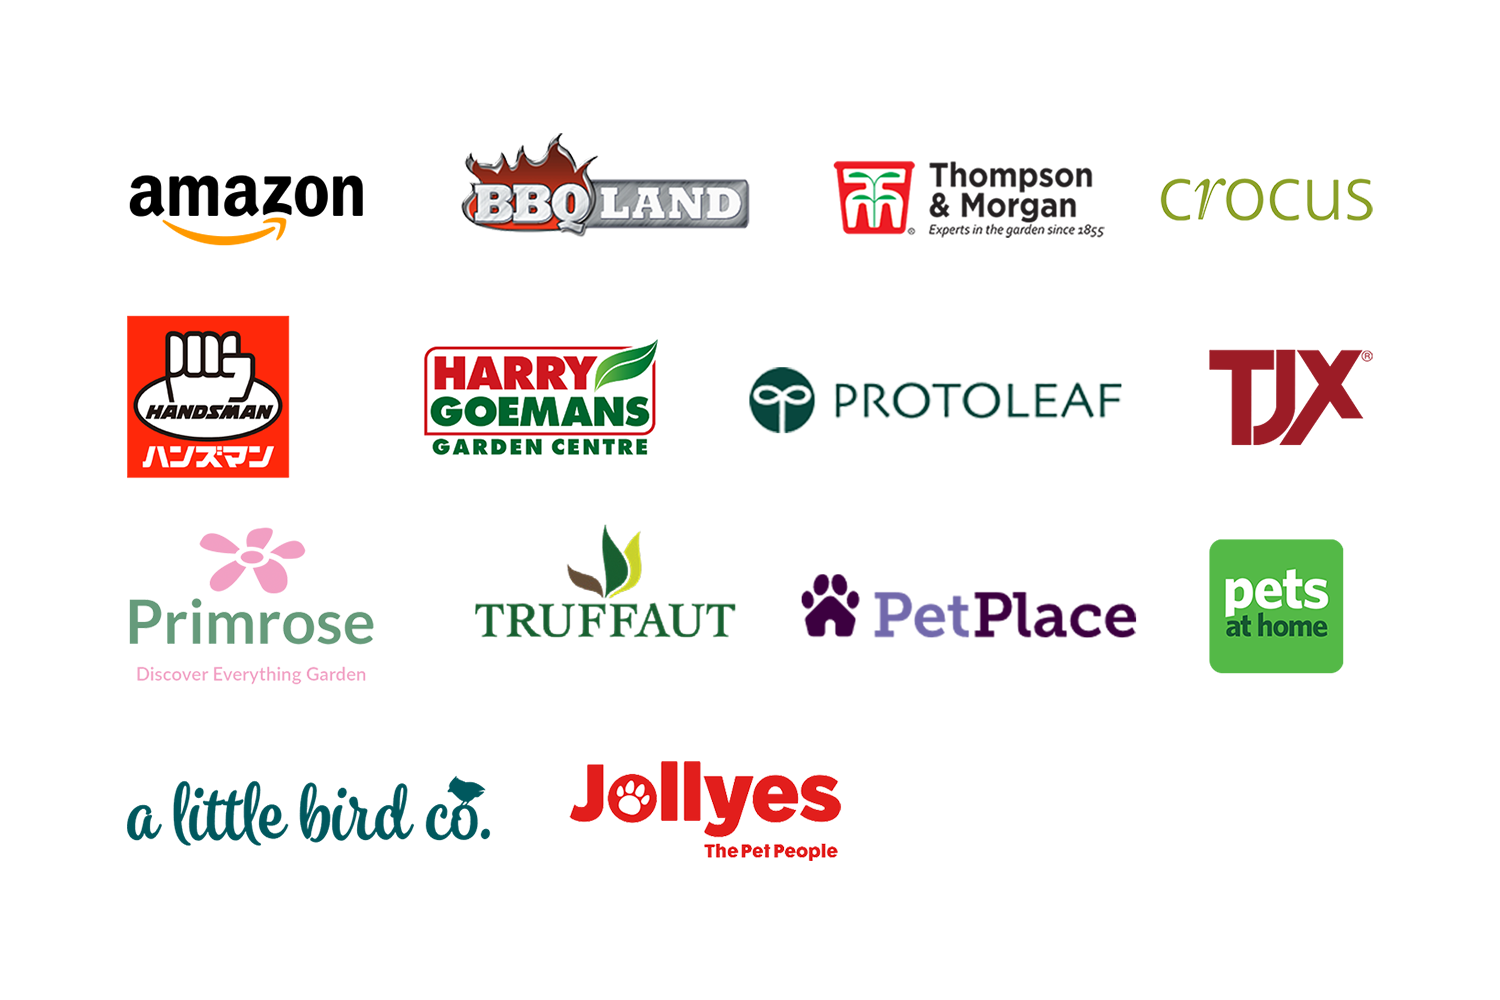 Logos of Online Businesses, International Businesses and Pet Retailers visiting Glee show